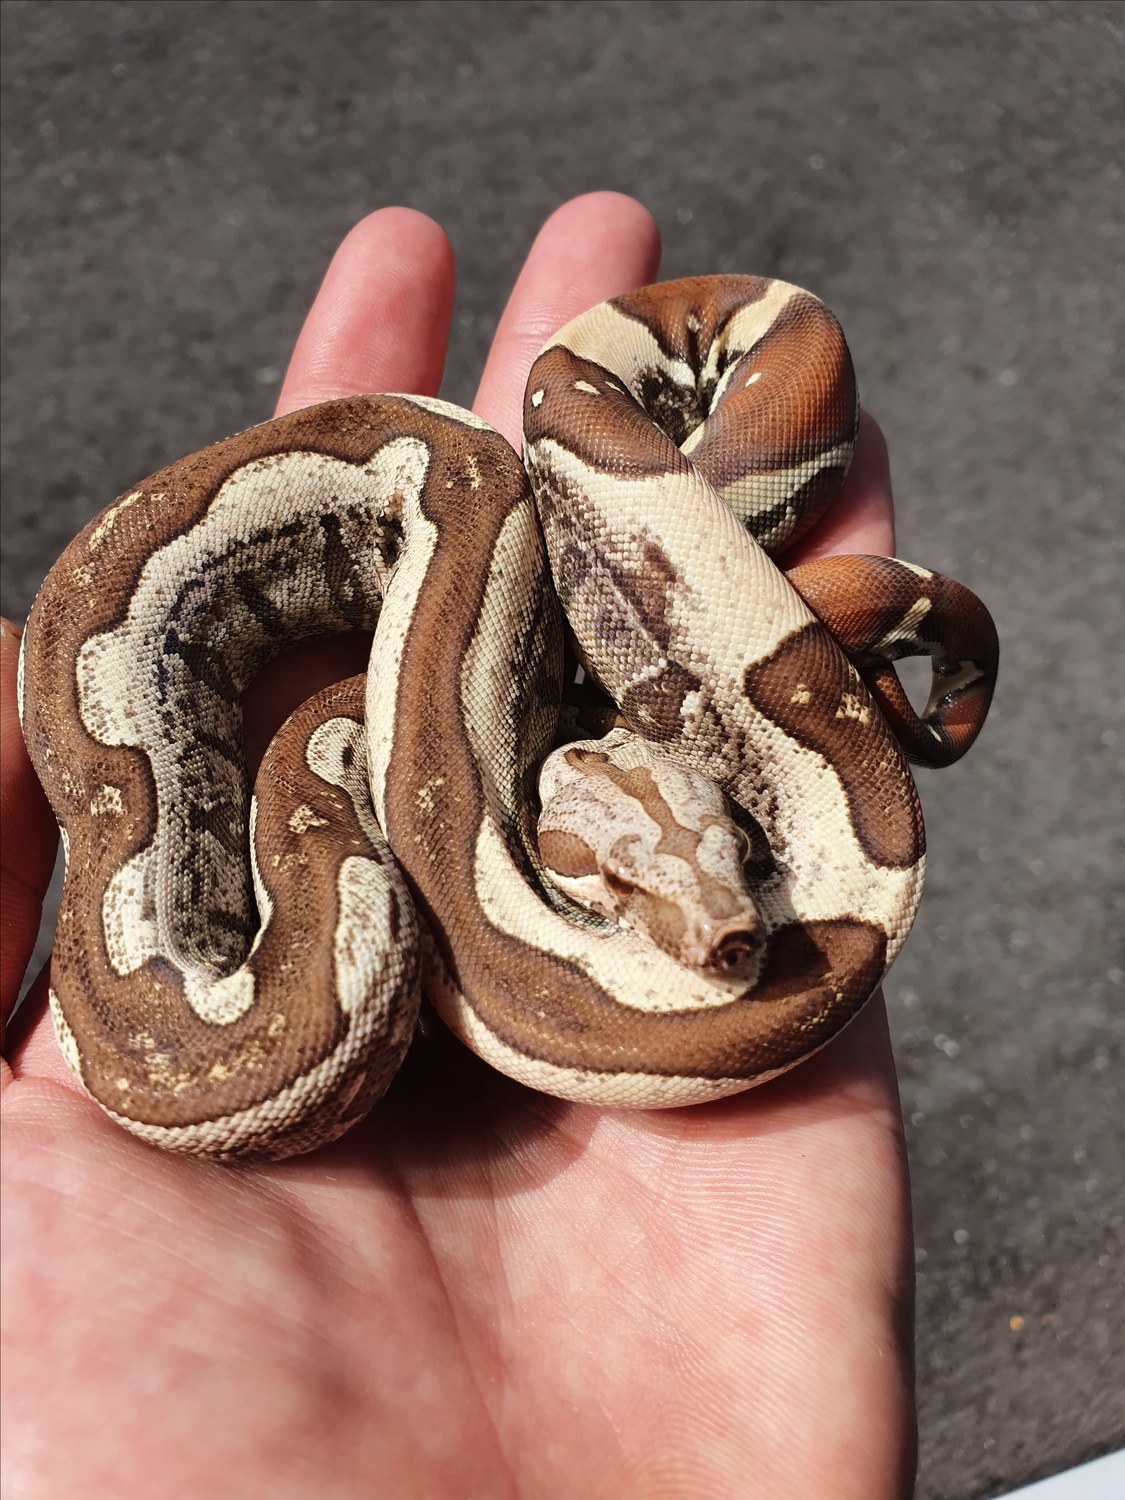 VPI IMG Jungle Boa Constrictor by AB Snakes